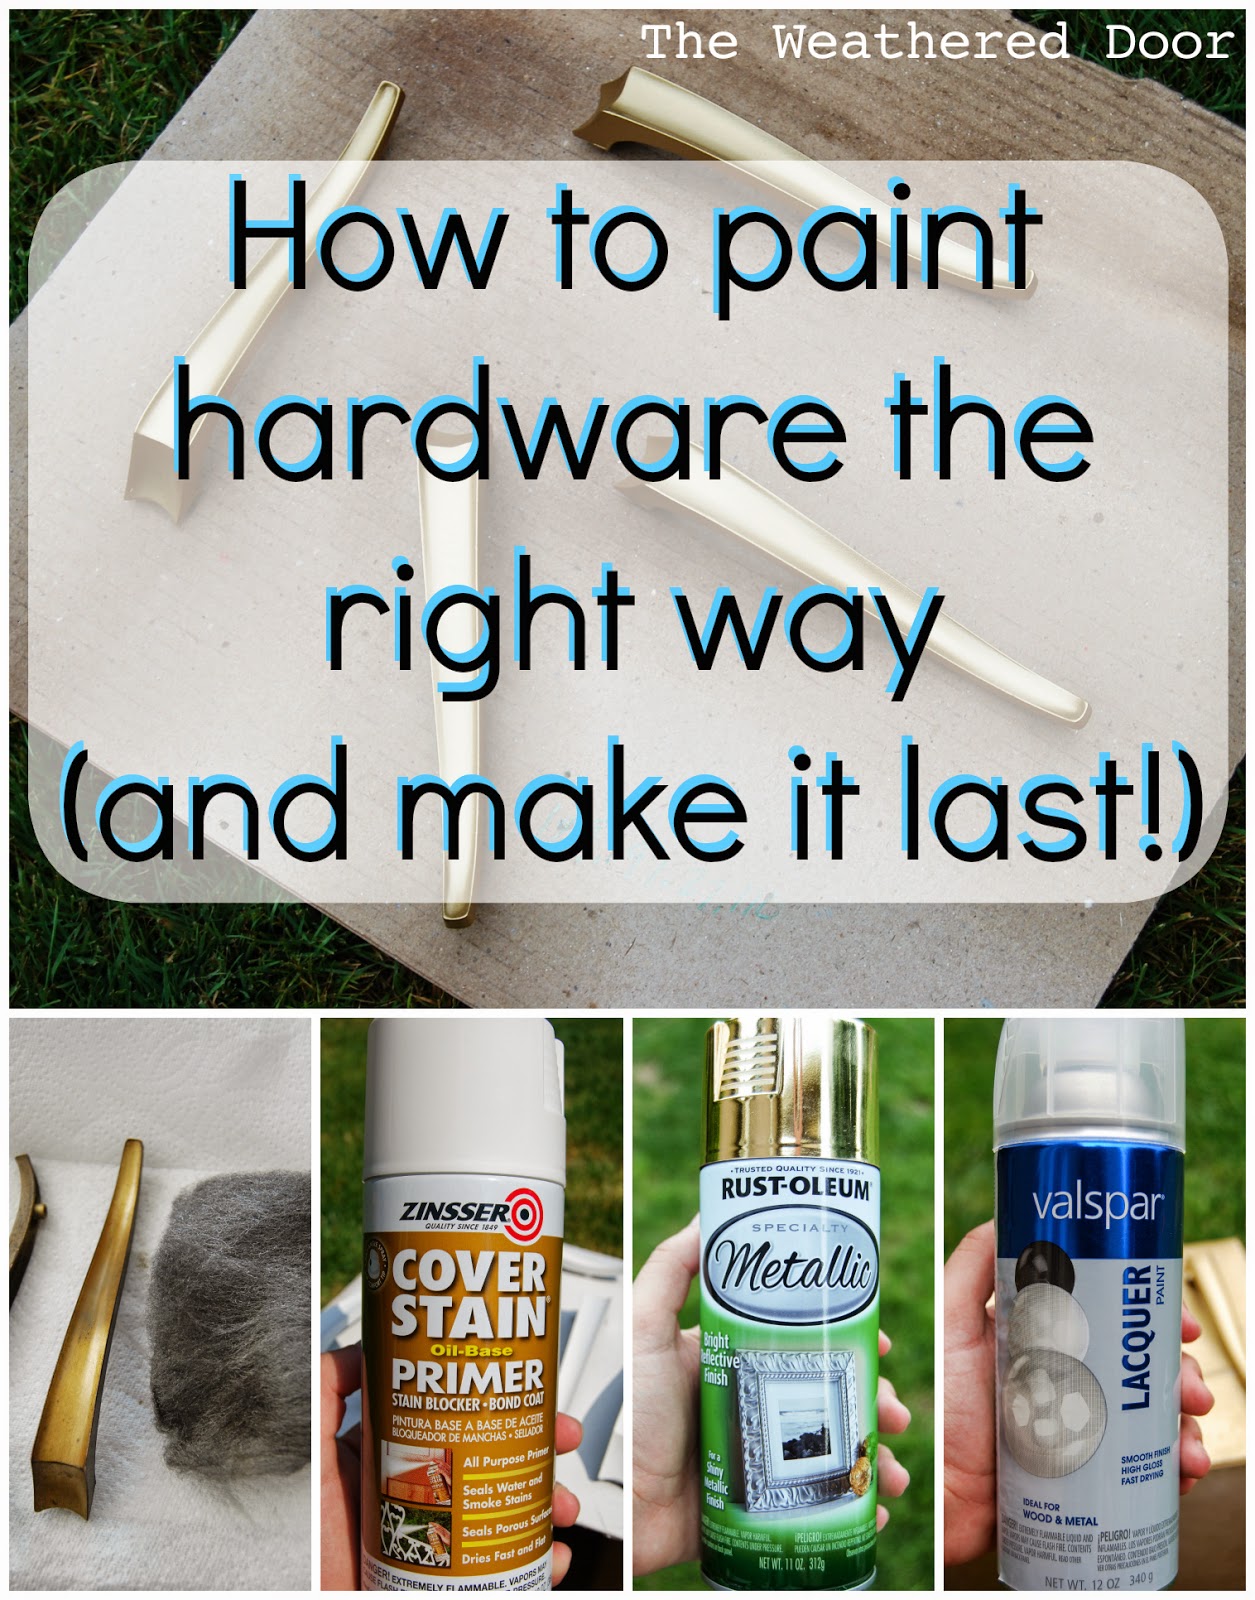 How To Paint Hardware And Make It Last, How To Spray Paint Kitchen Door Handles